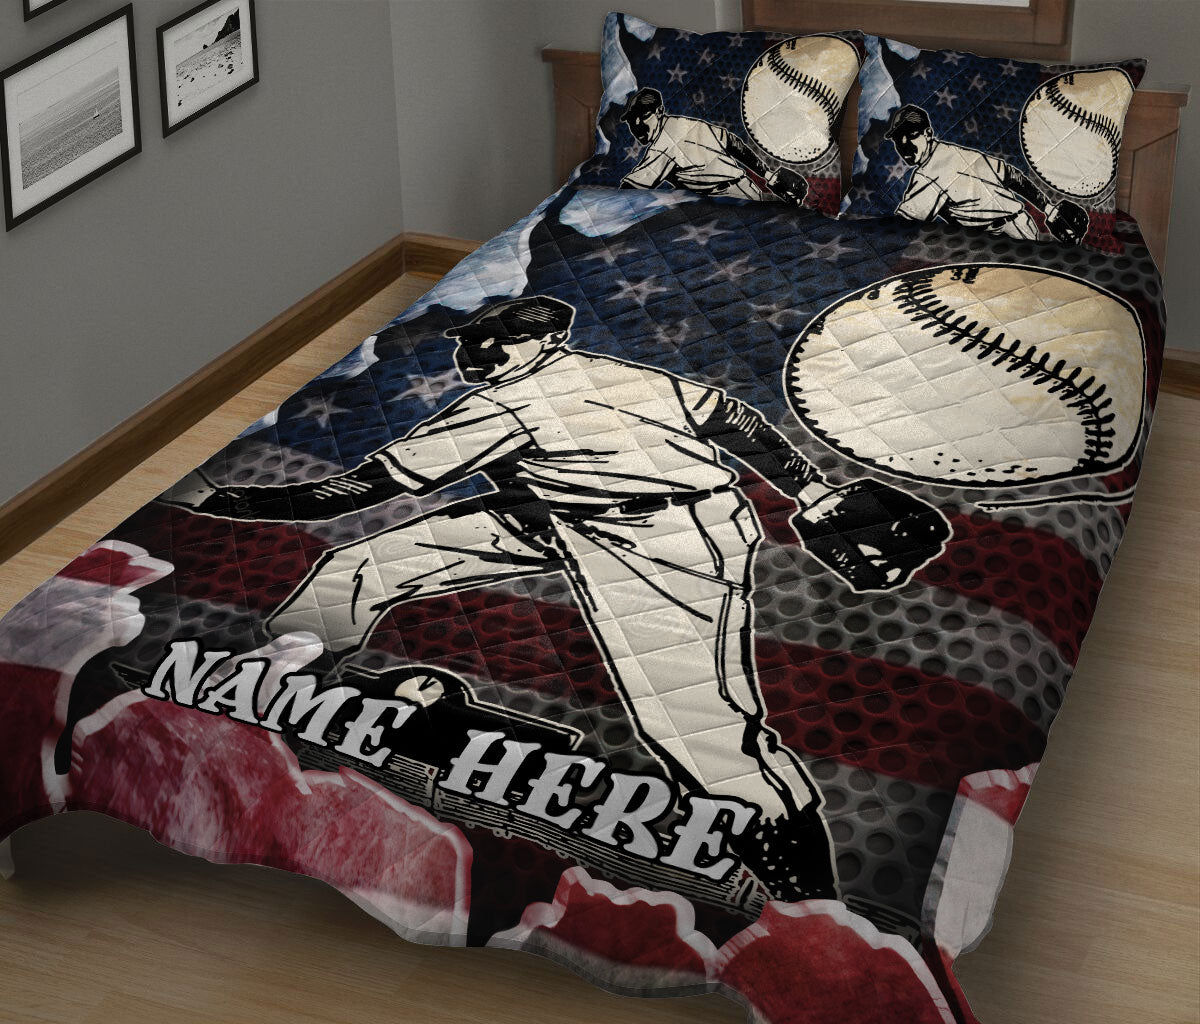 Ohaprints-Quilt-Bed-Set-Pillowcase-Baseball-Player-American-Flag-Crack-Pattern-Sports-Custom-Personalized-Name-Blanket-Bedspread-Bedding-115-King (90'' x 100'')